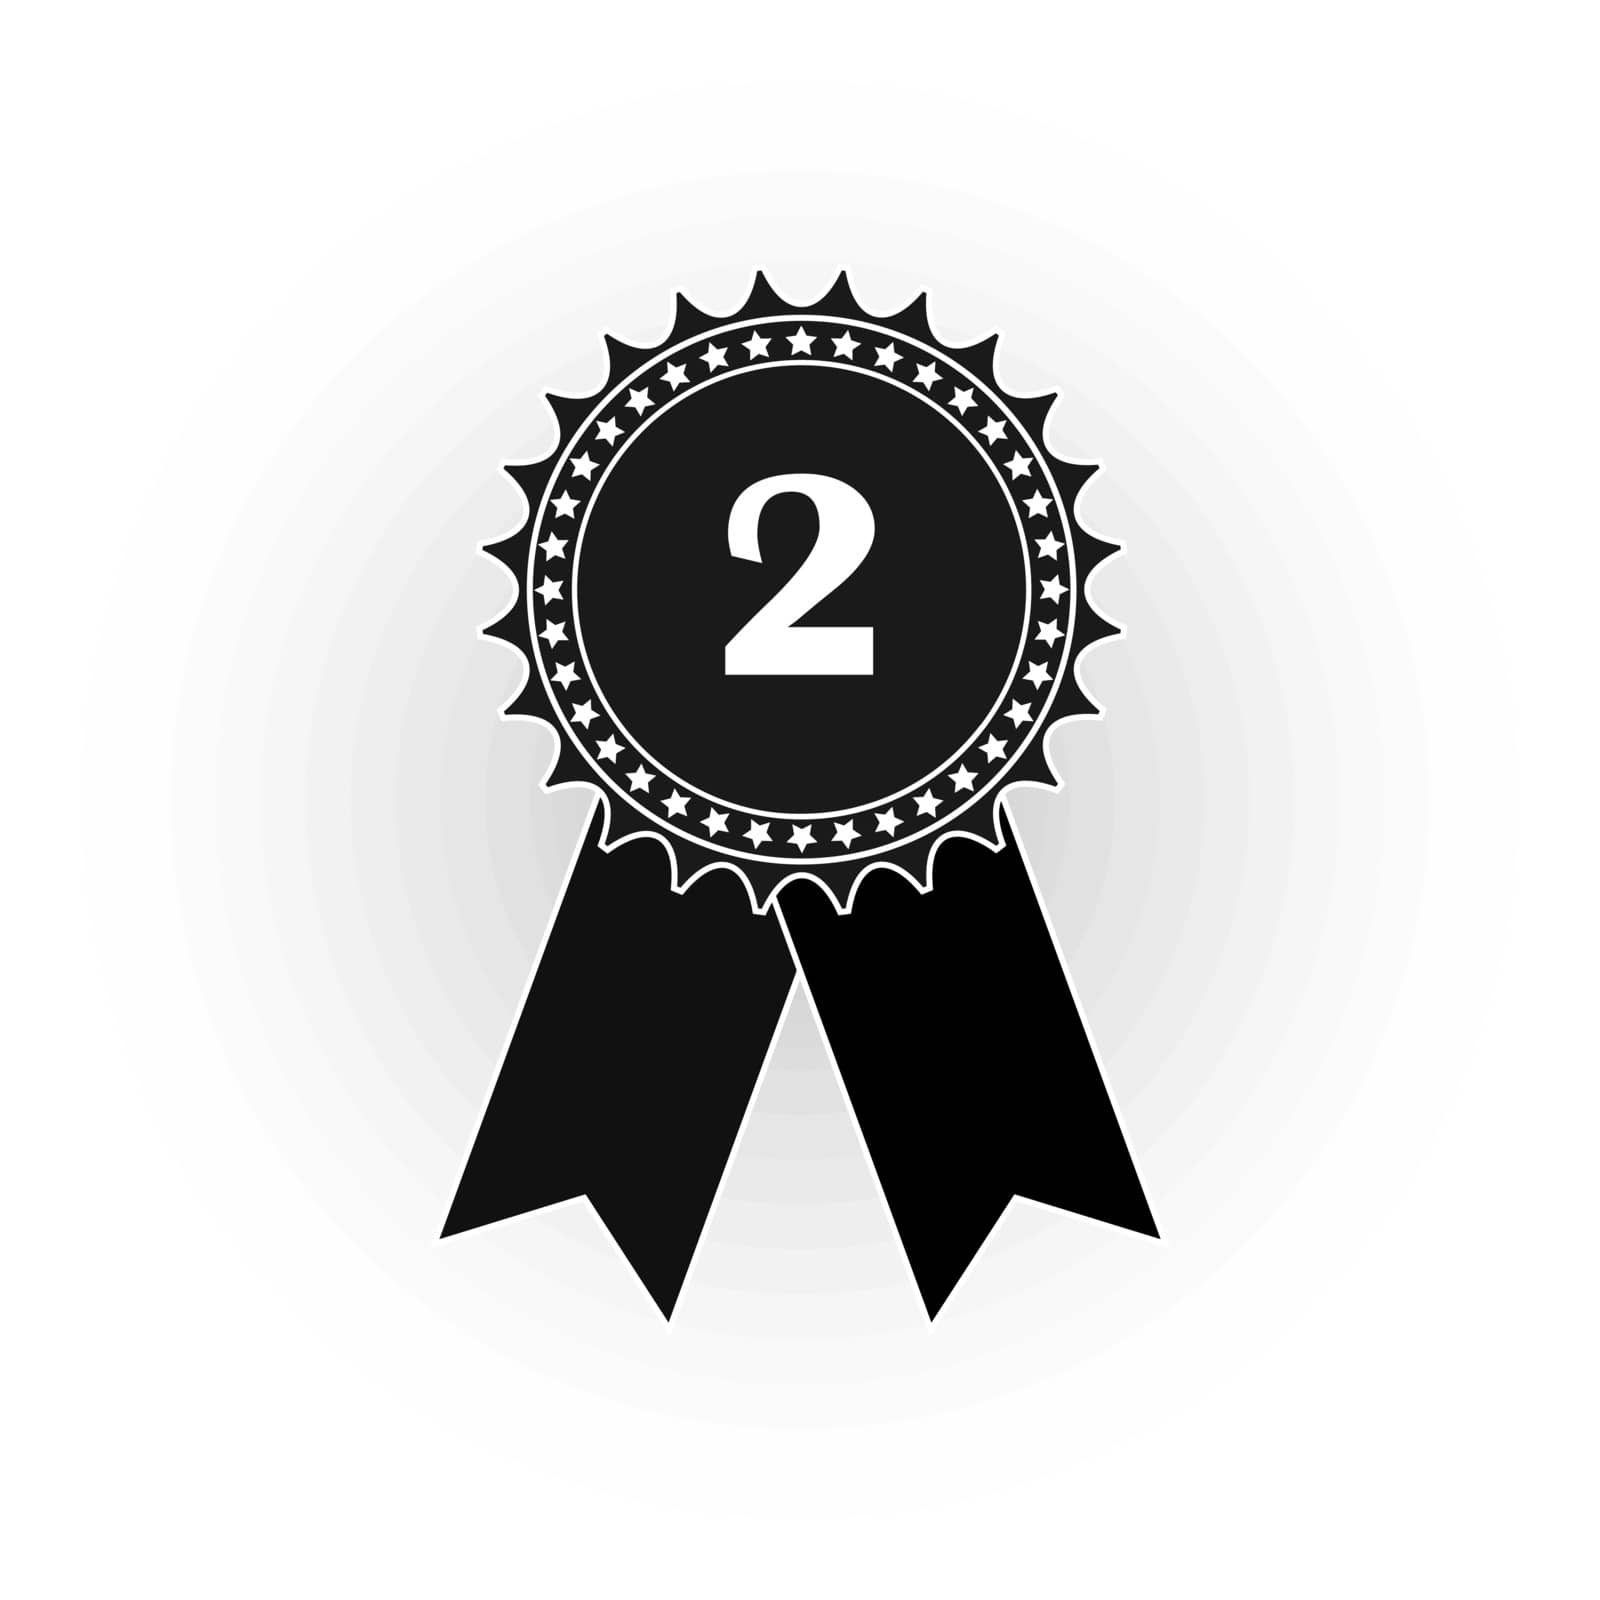 Black and white icon medal with the numeral two, a flat image by Grommik